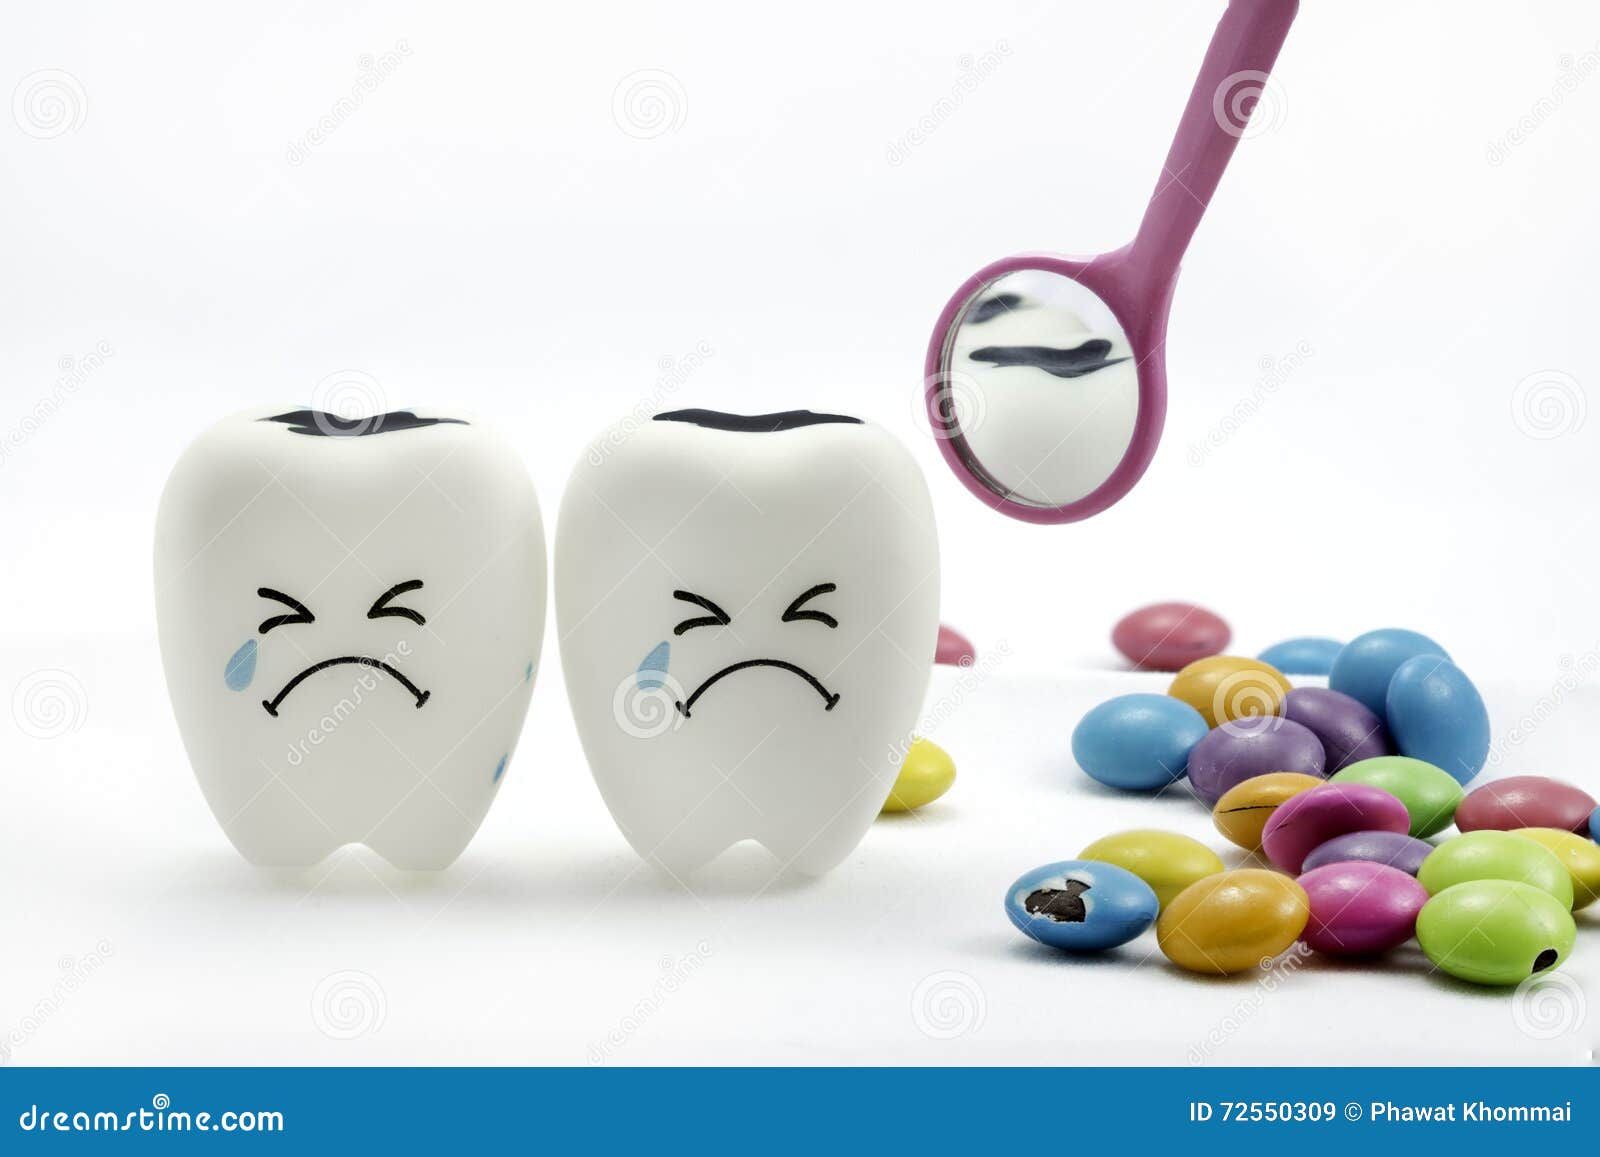 tooth decay is crying with dental mirror